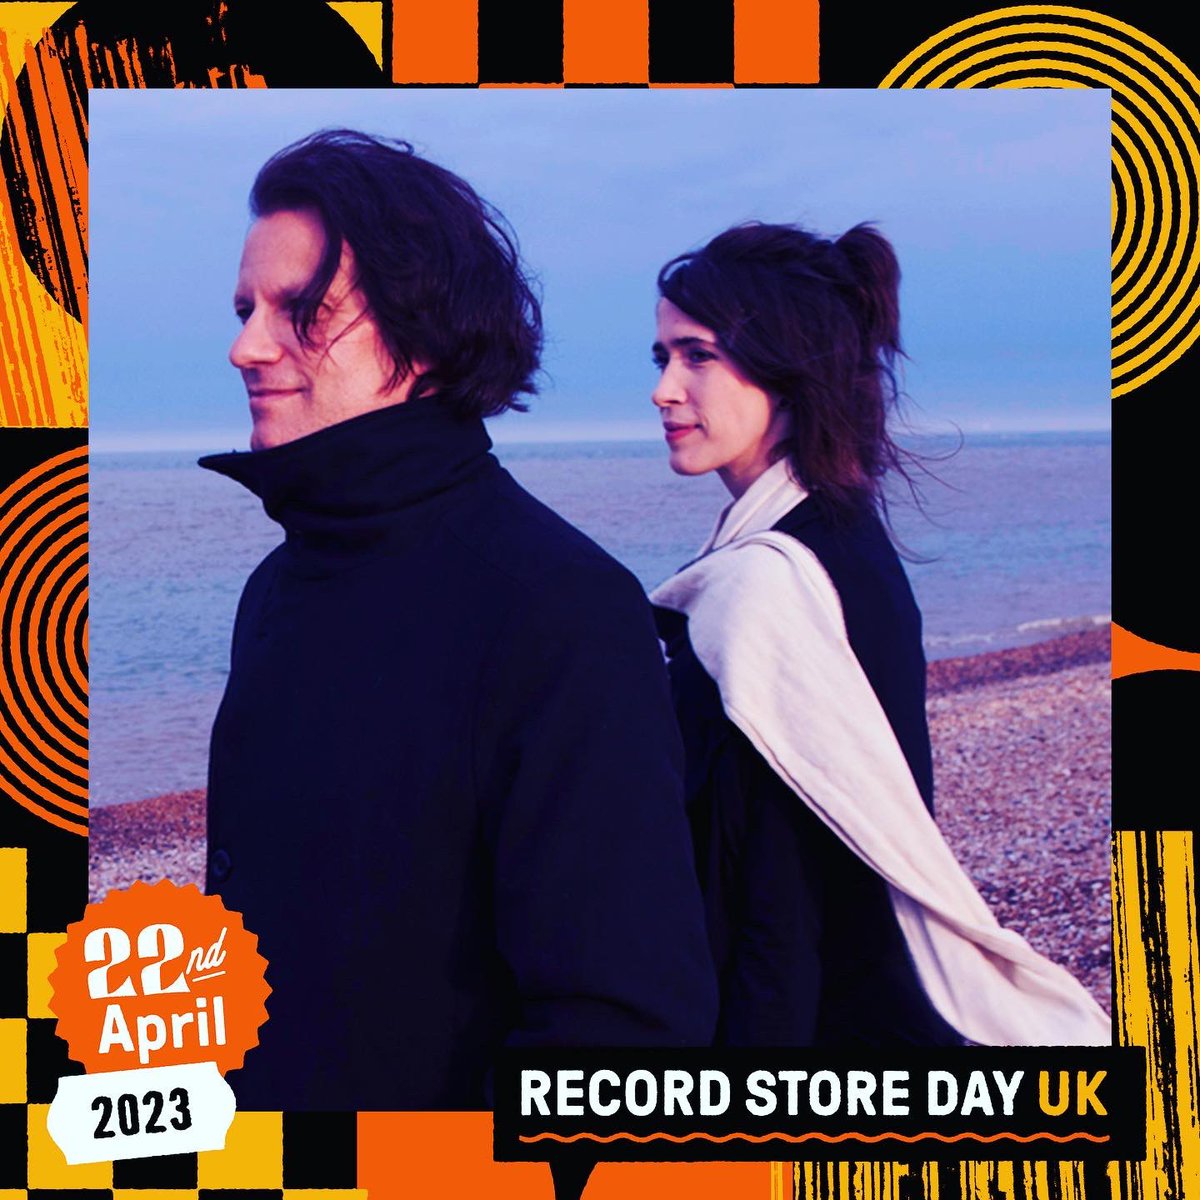 We’re so so excited for this super-special release - You asked, we listened, so here's ‘Off Cuts’ by FrouFrou on Vinyl! Limited amount only so make sure you grab one in your local participating shop on @RecordStoreDay 22nd April or order online! #RSD23: recordstoreday.co.uk/stores/